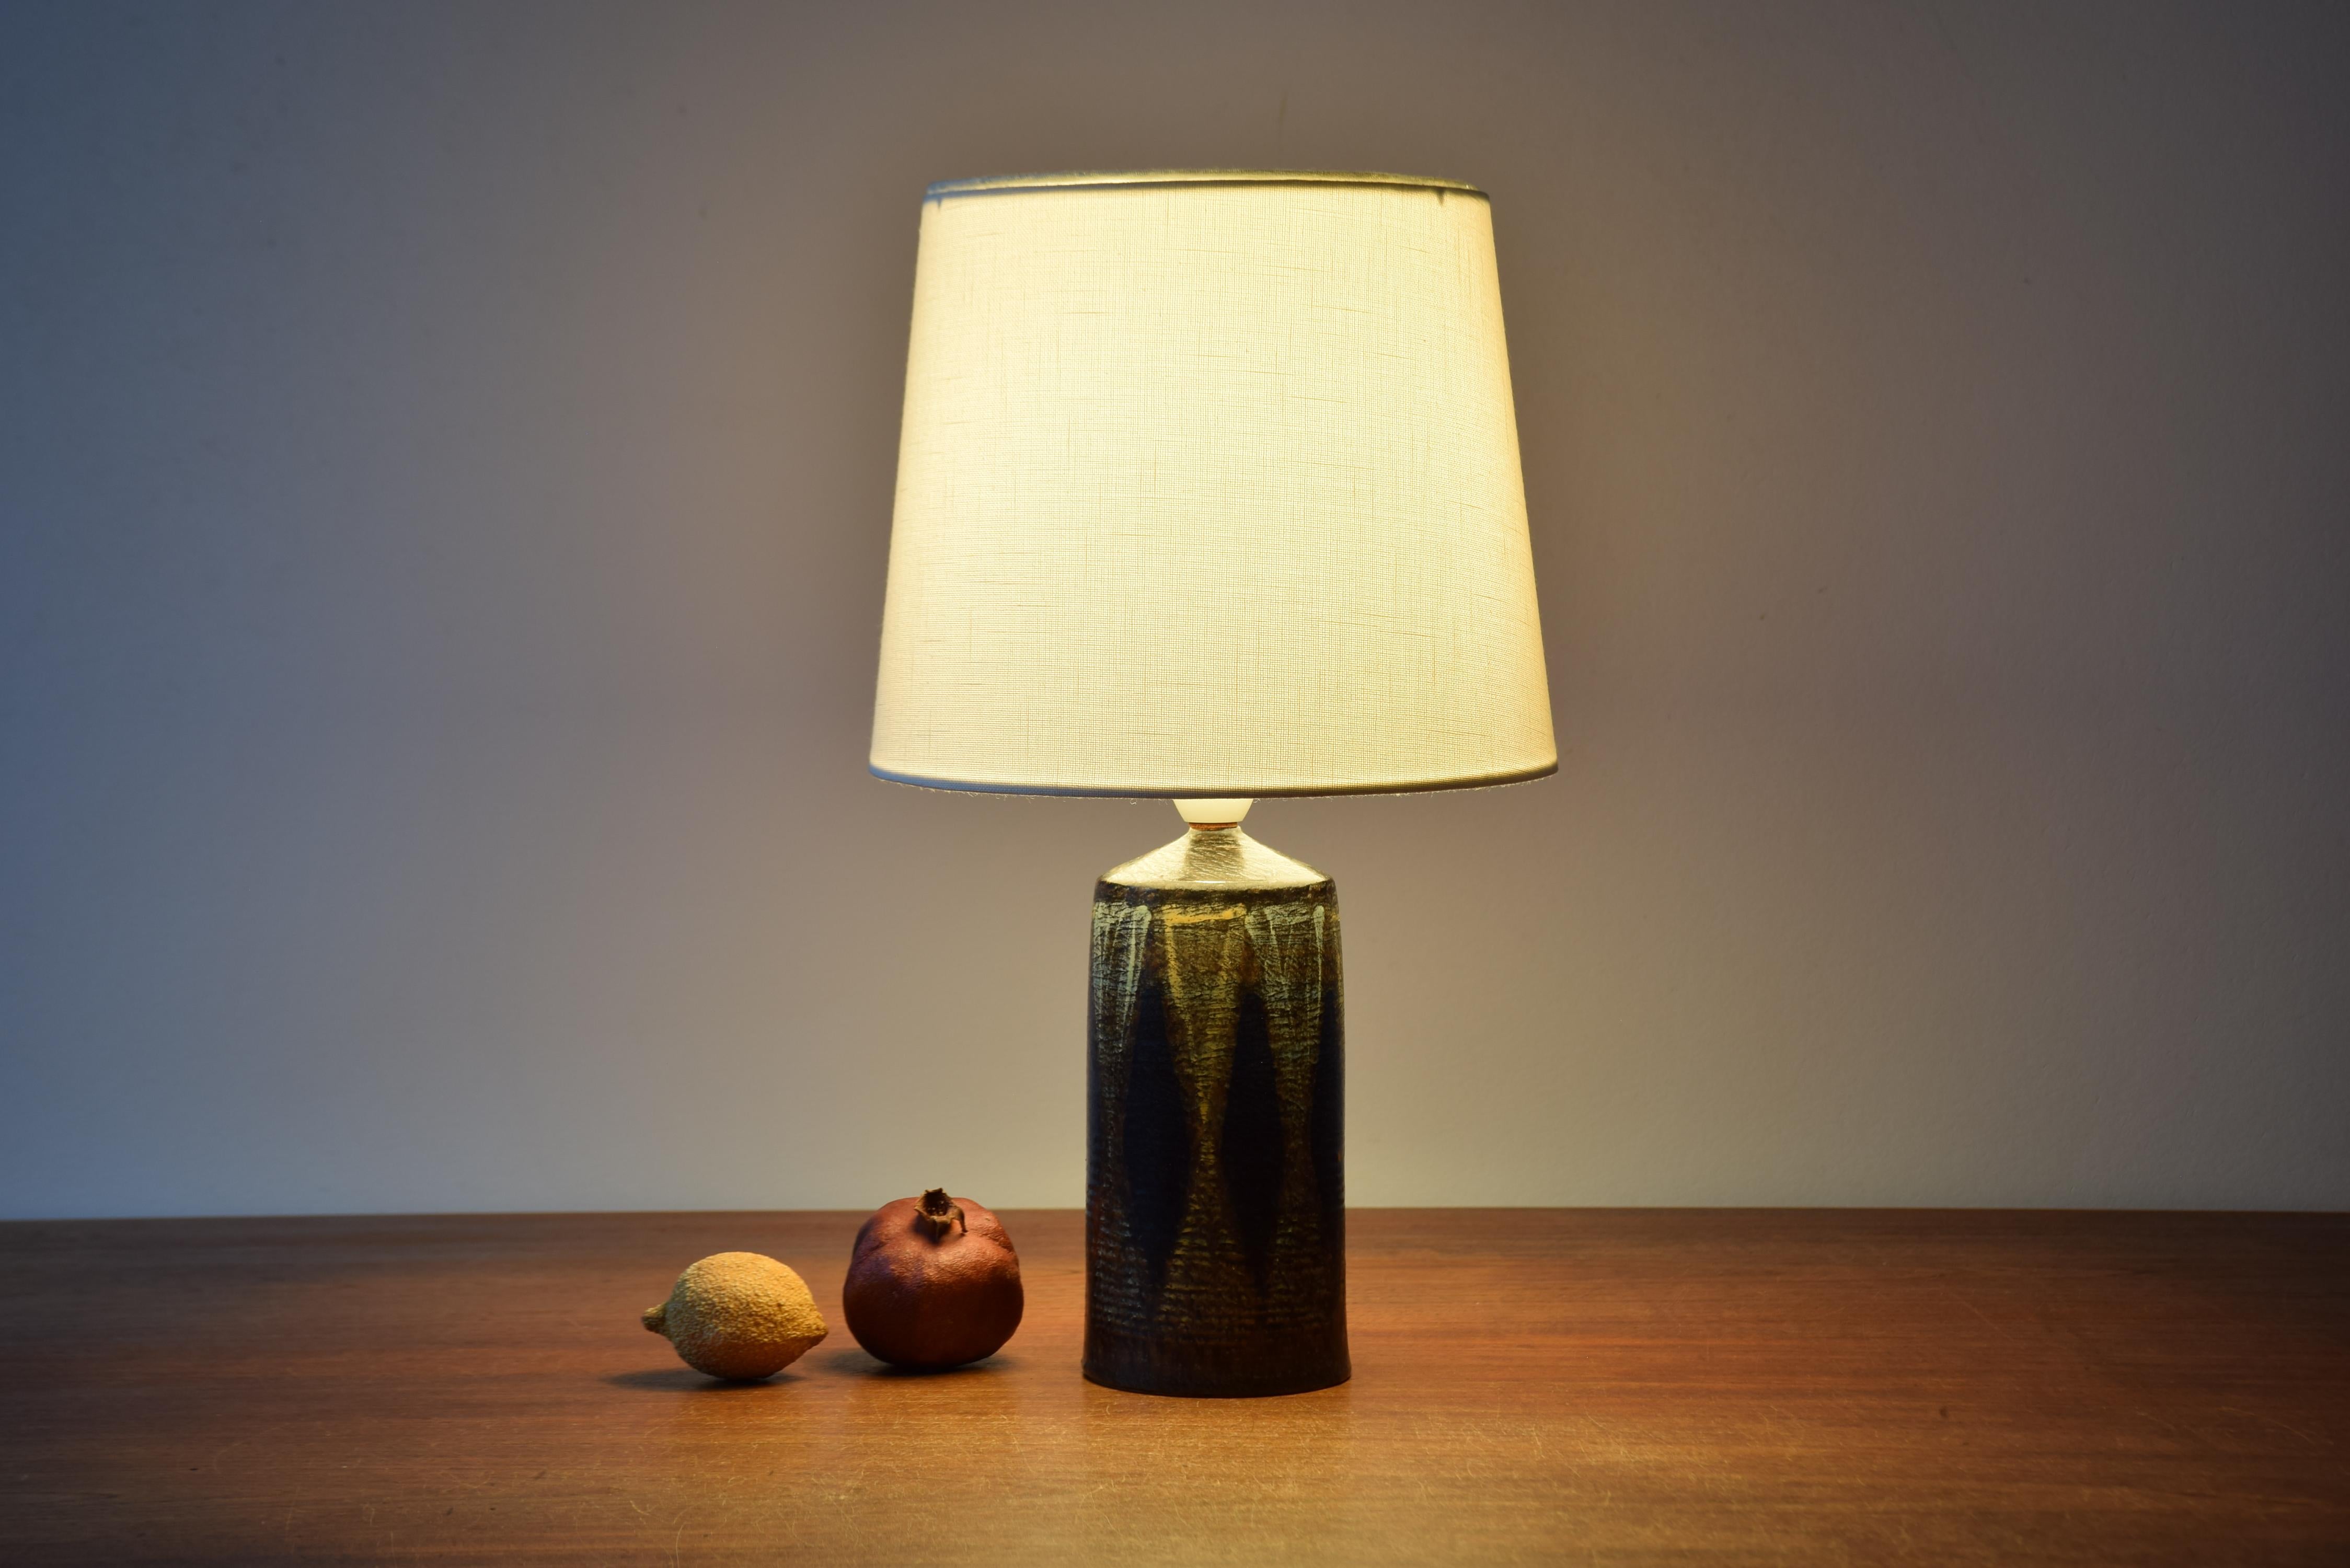 Midcentury ceramic table lamp by Danish painter and ceramist Kai Klinge (1925-2000). Made circa 1950s to 1960s. 

The lamp is decorated with Kai Klinge´s typical semi matte glaze in muted colors: brown, ochre, yellow, dark blue and pale